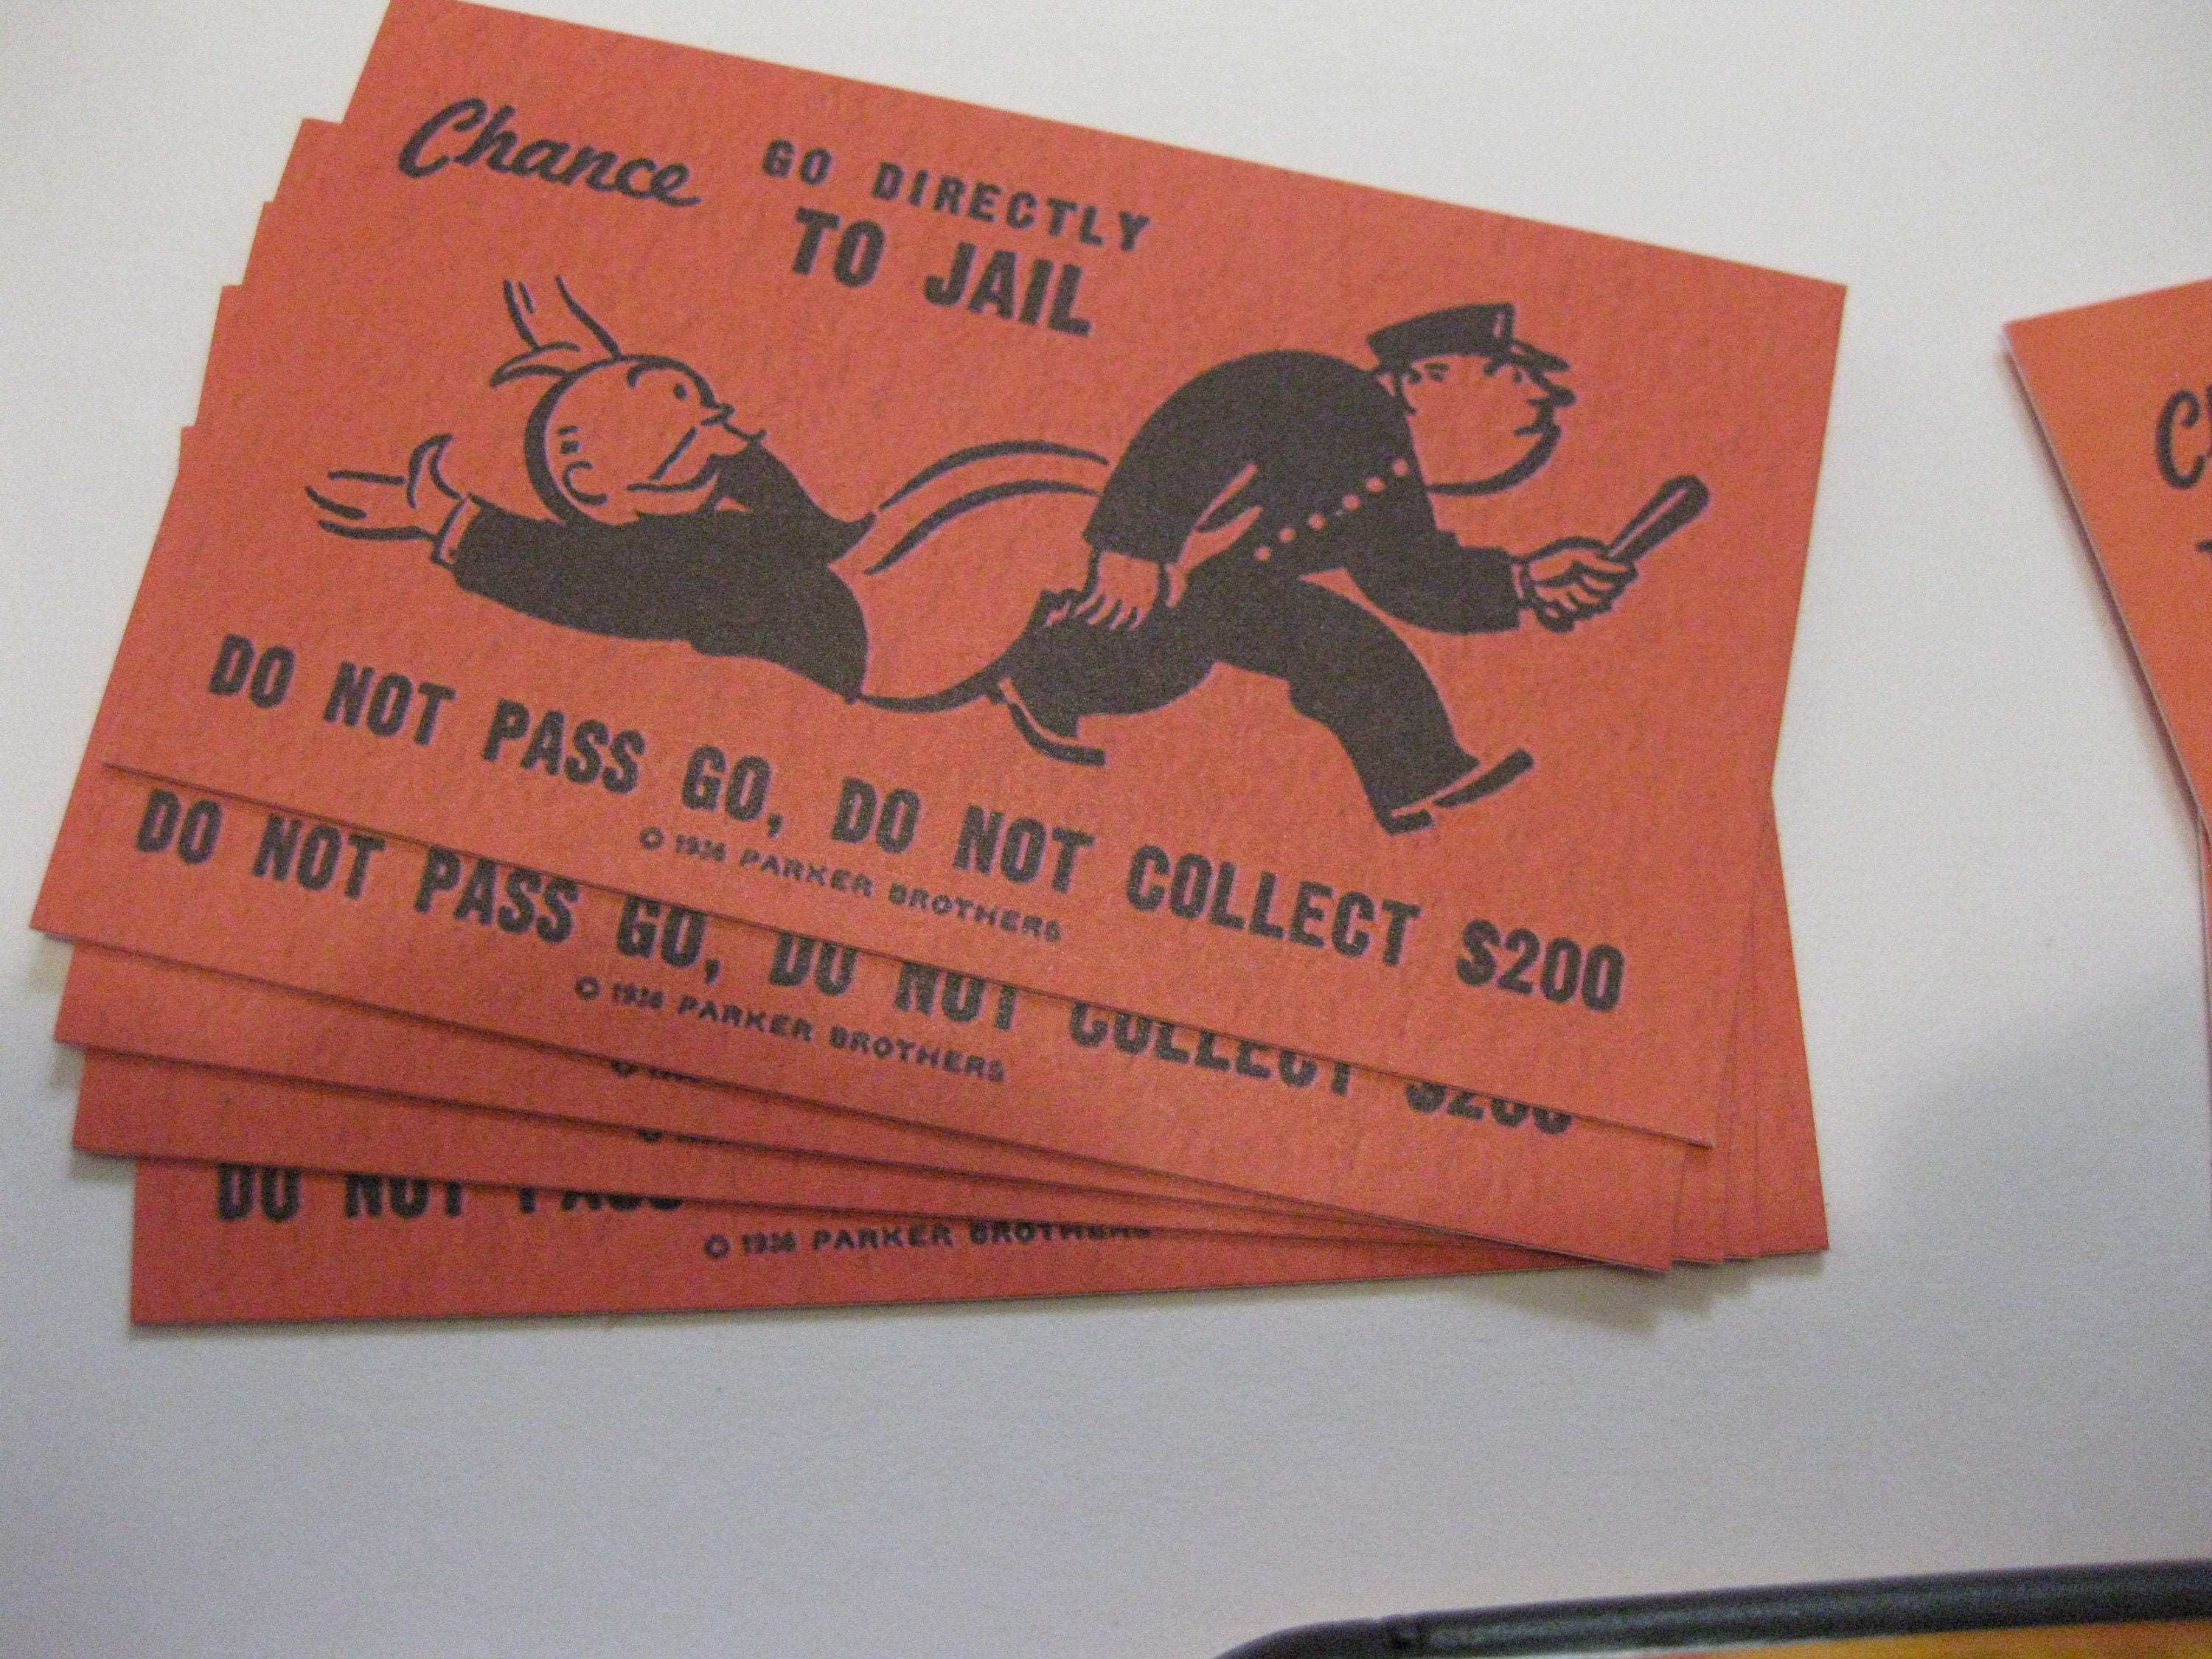 10-go-to-jail-cards-from-monopoly-go-directly-to-etsy-uk